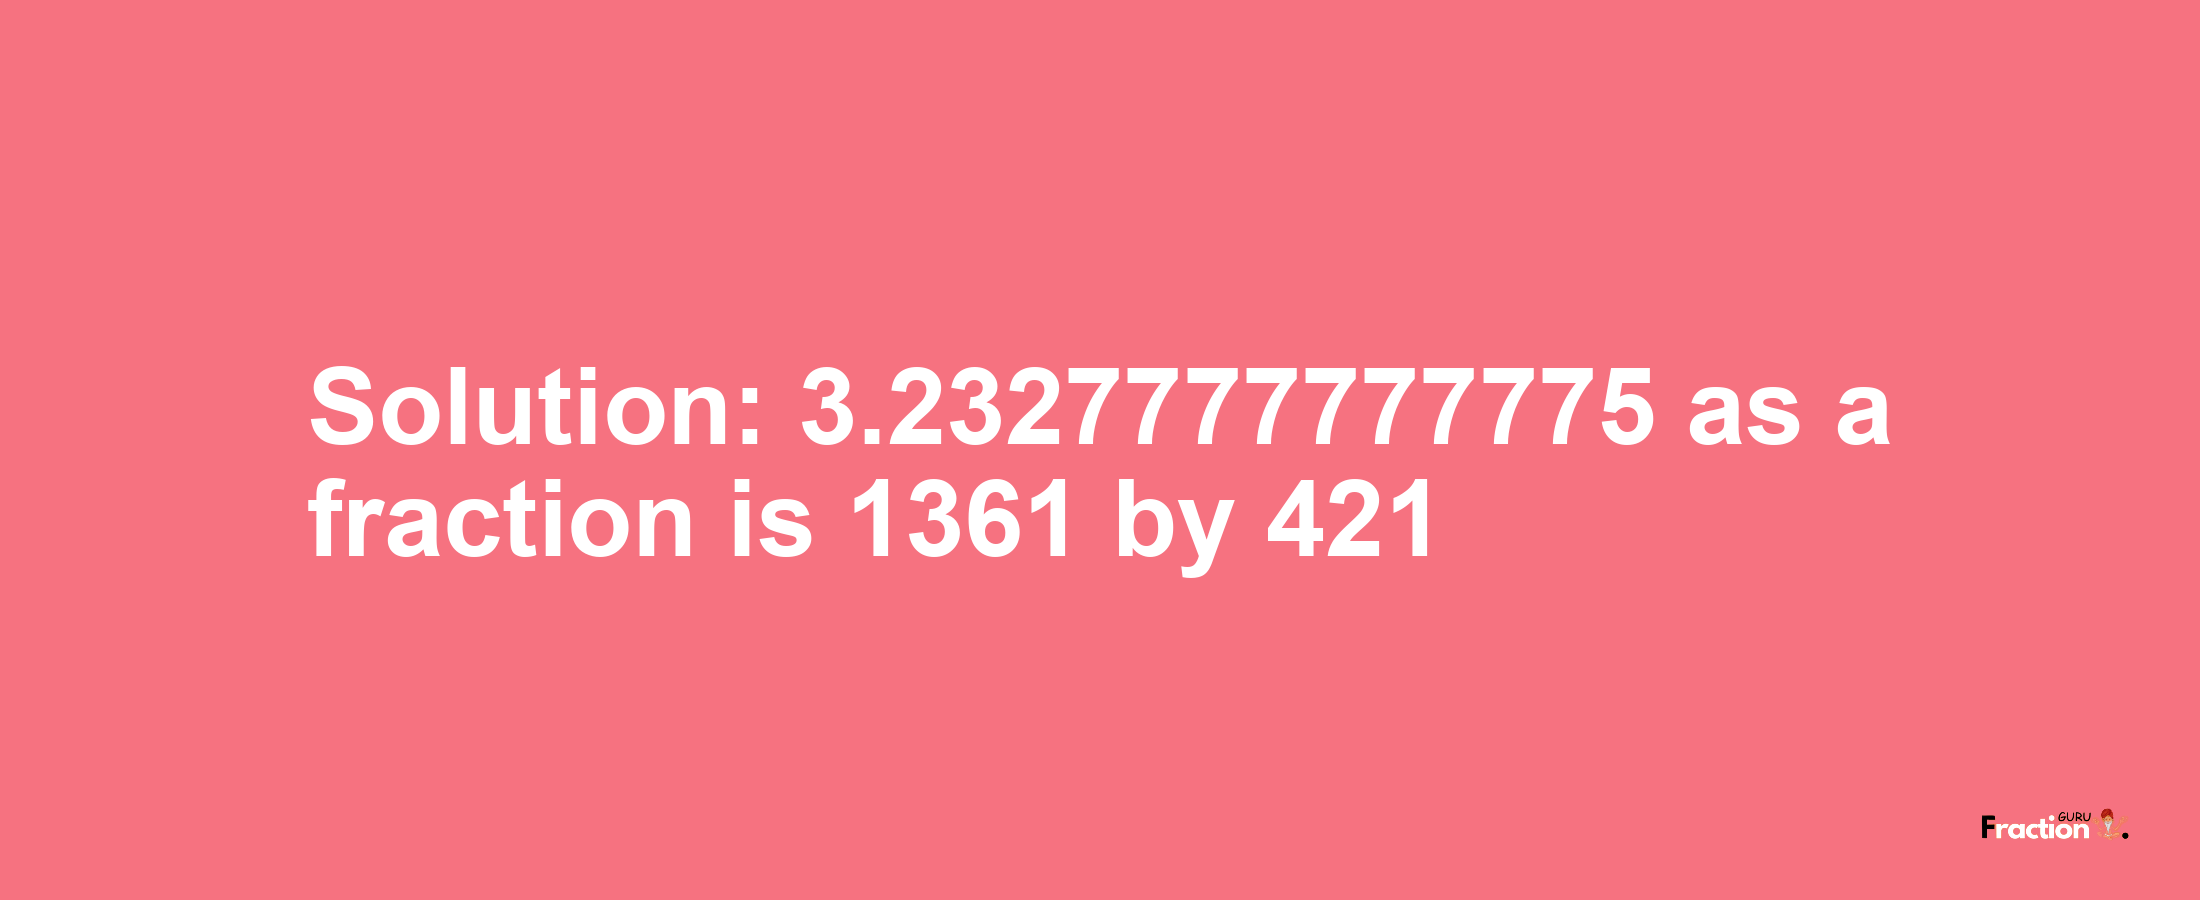 Solution:3.2327777777775 as a fraction is 1361/421